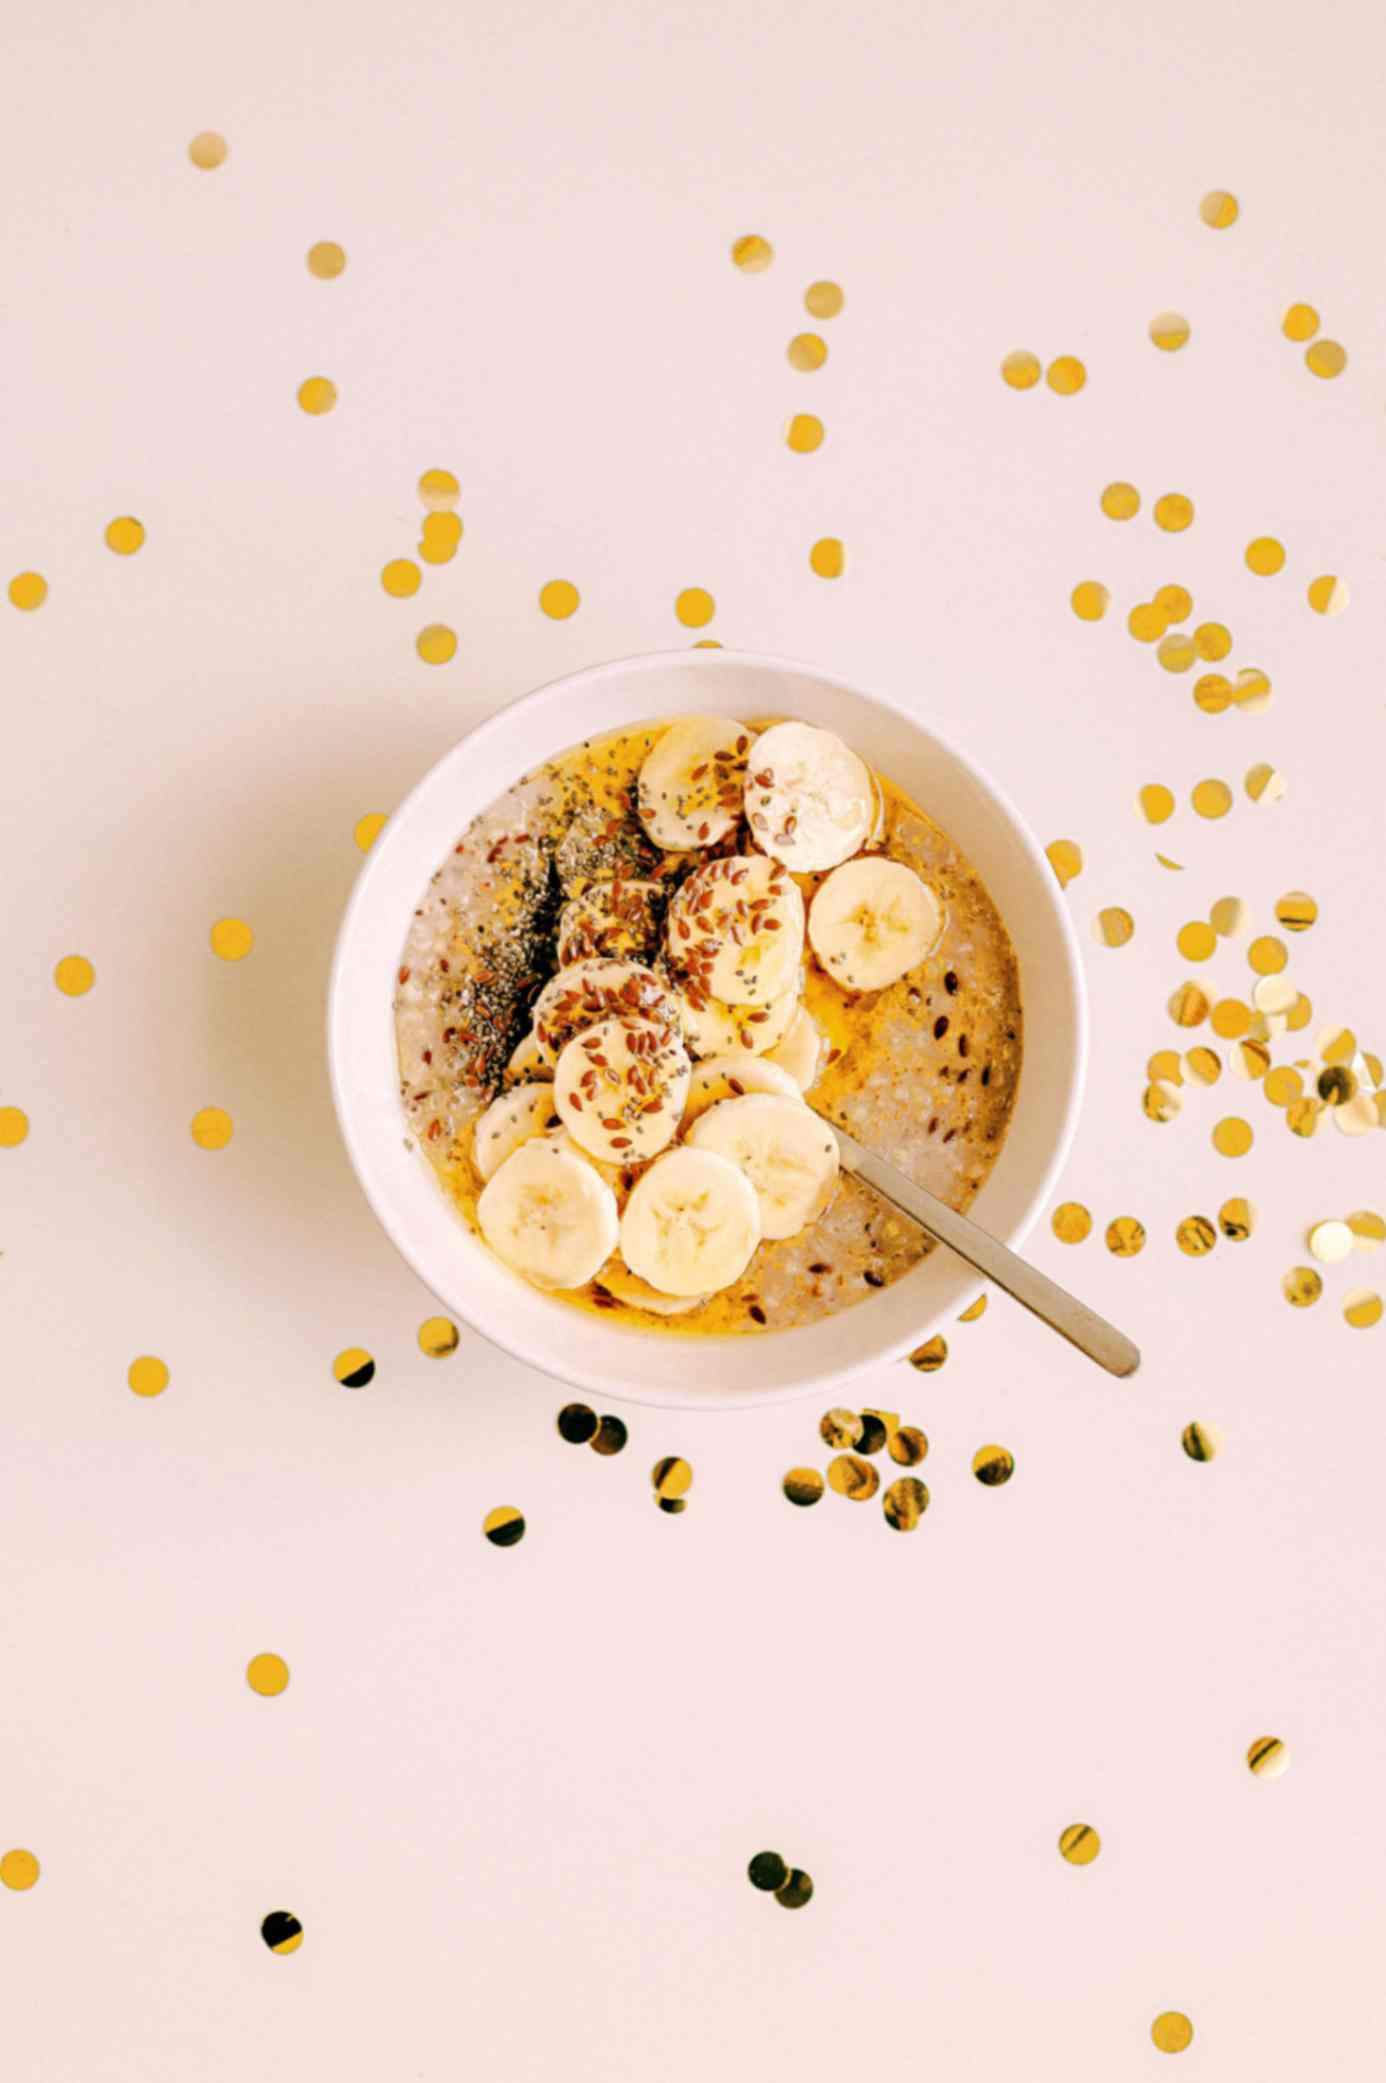 A bowl of outmeal with banana slices and seeds on top. Gold confetti is on the table surrounding the bowl.